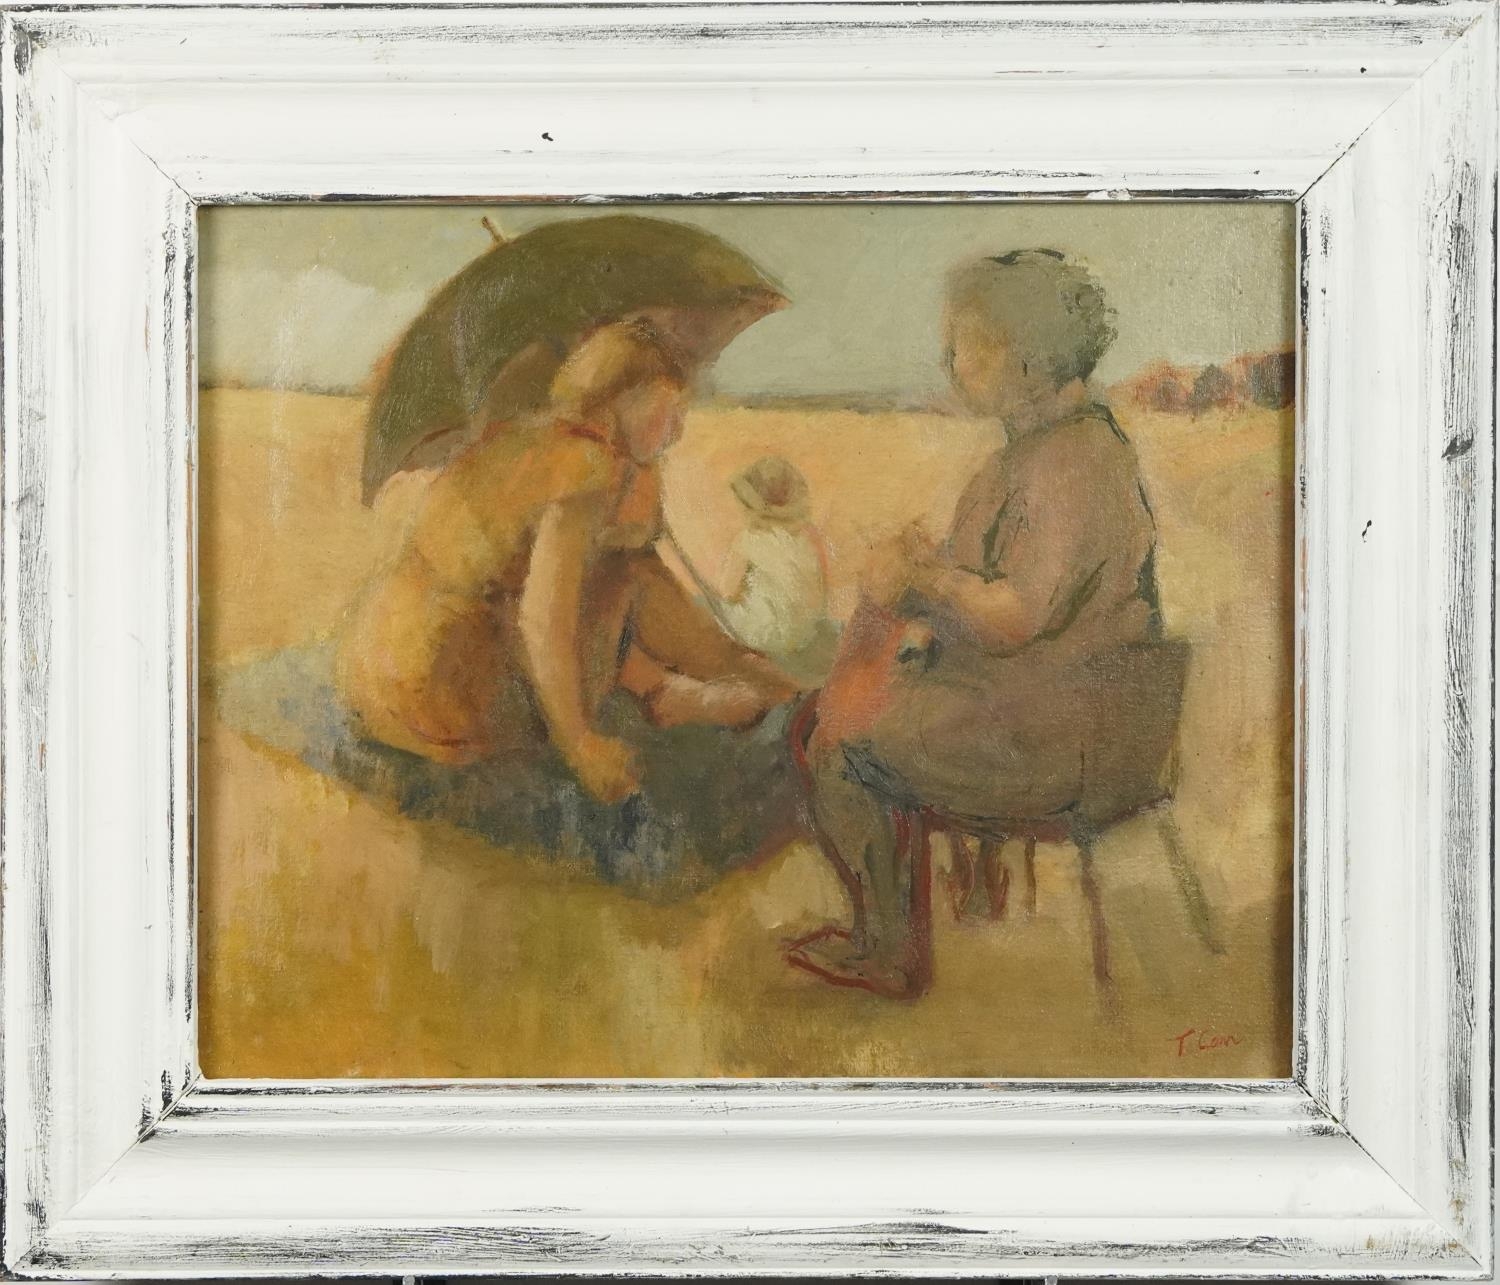 Beach scene with mother and child, post war British oil on canvas, mounted and framed, 50cm x 39cm - Image 2 of 5